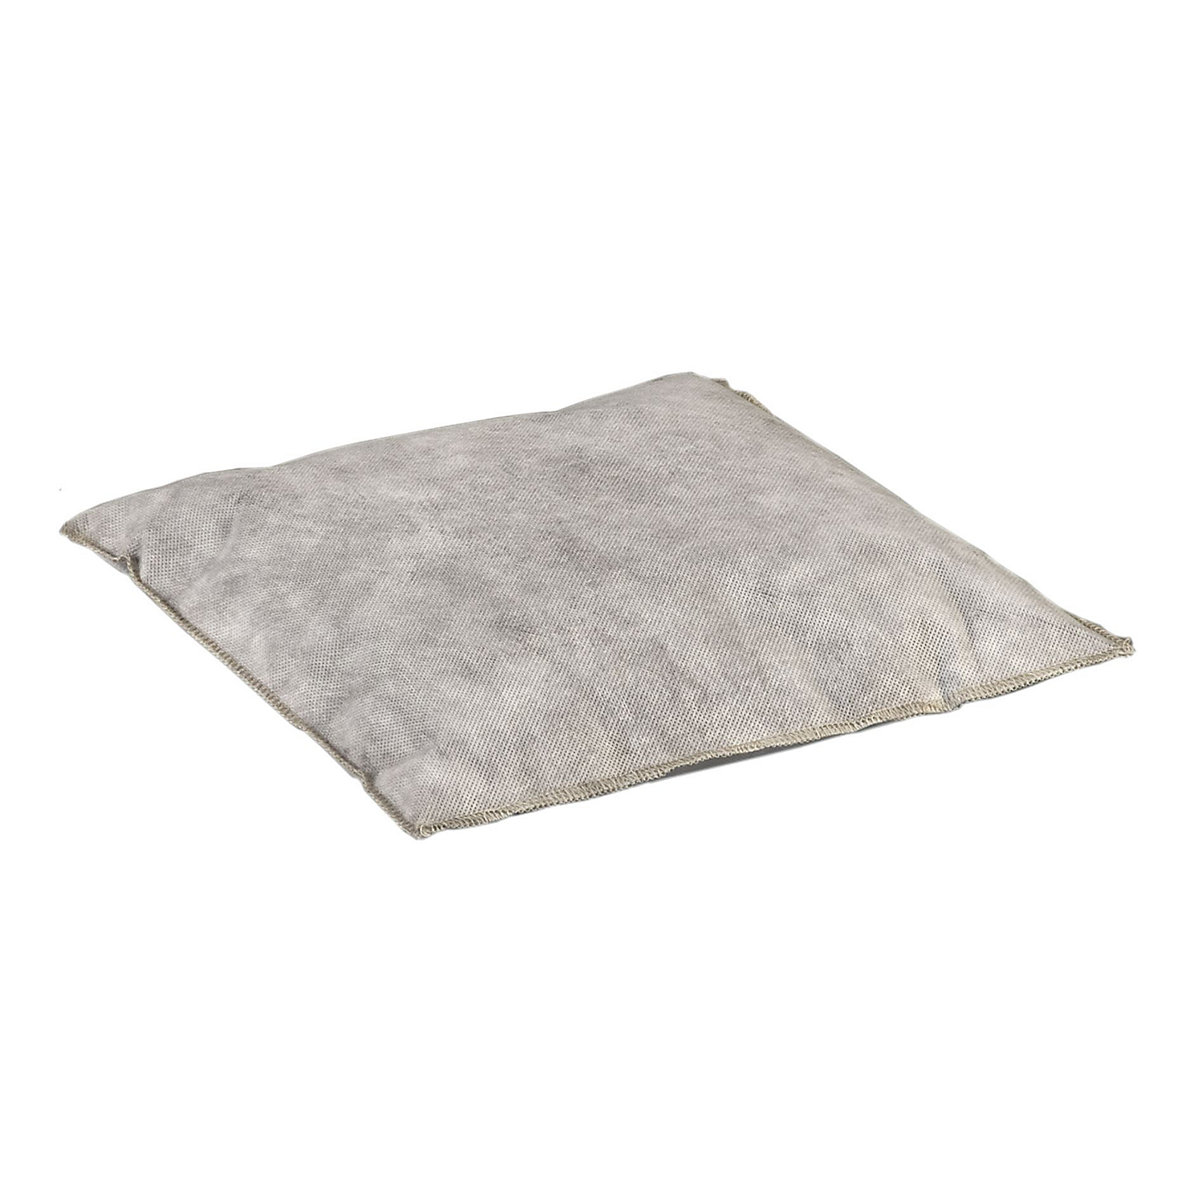 Absorbent cushion for oil with CorkSorb filling